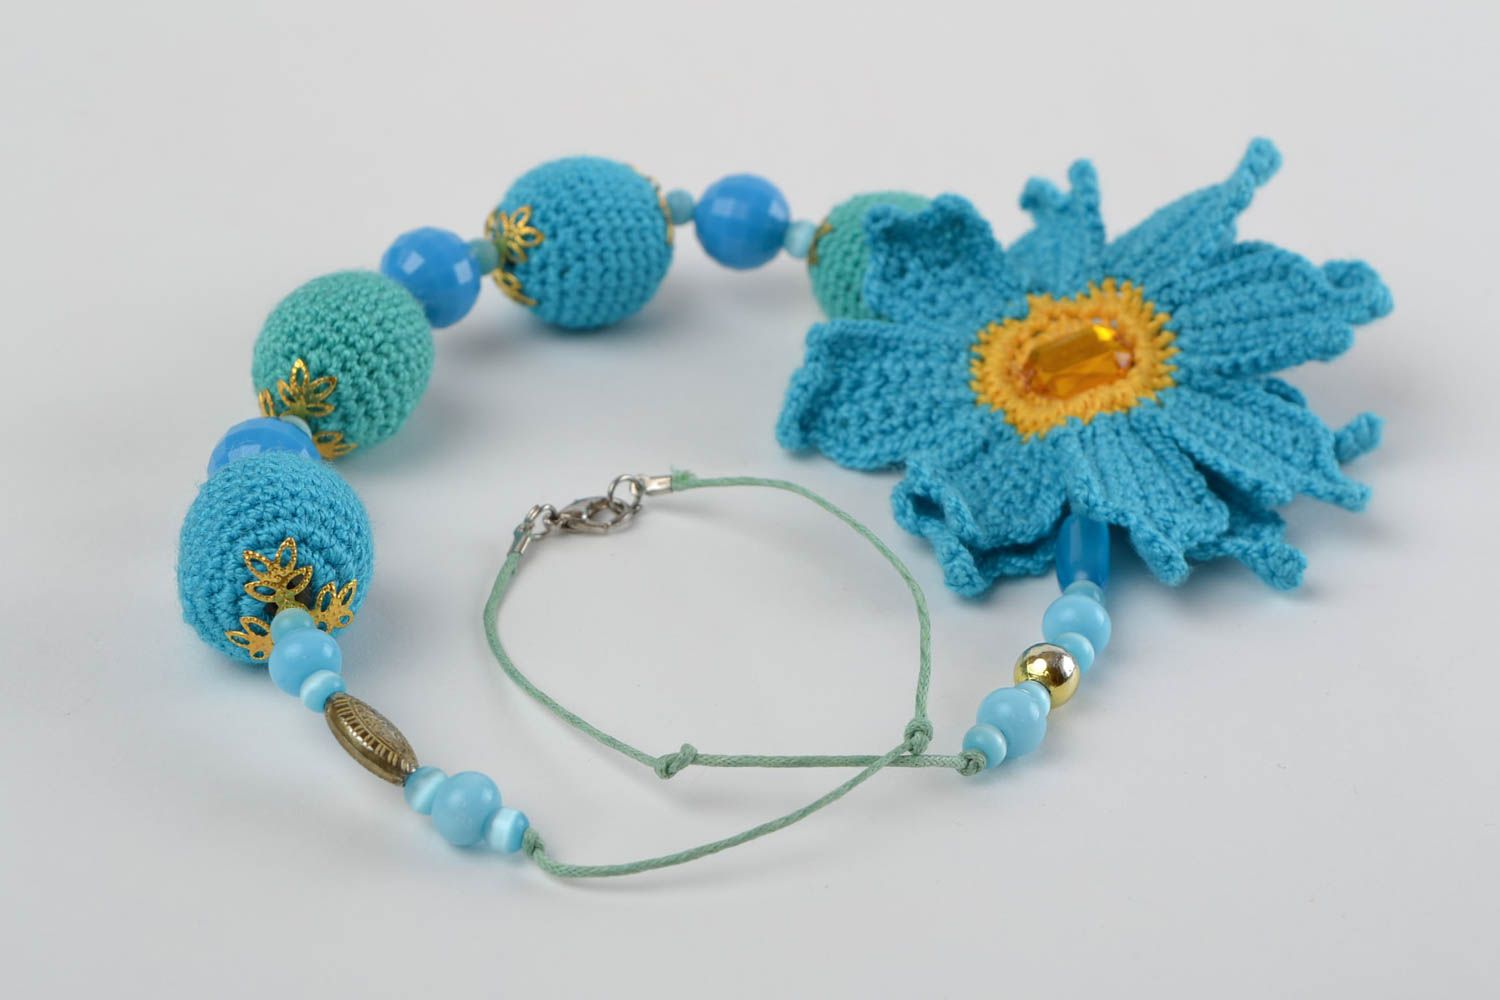 Handmade blue crochet ball necklace with beads and flower babywearing necklace photo 5